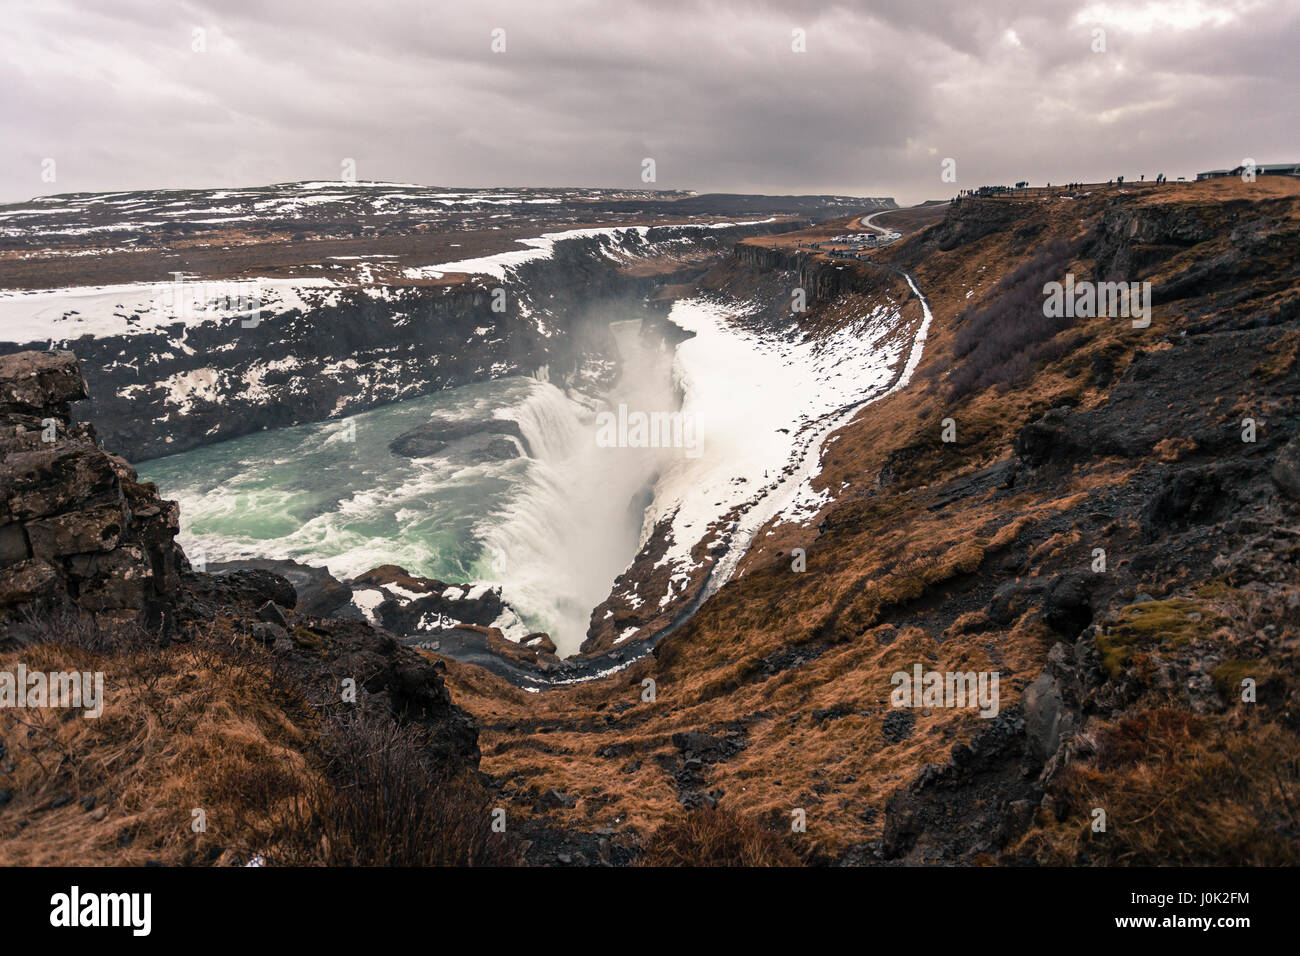 The iconic Gullfoss waterfall, part of the Golden Circle and one of the most popular tourist destinations in Iceland Stock Photo